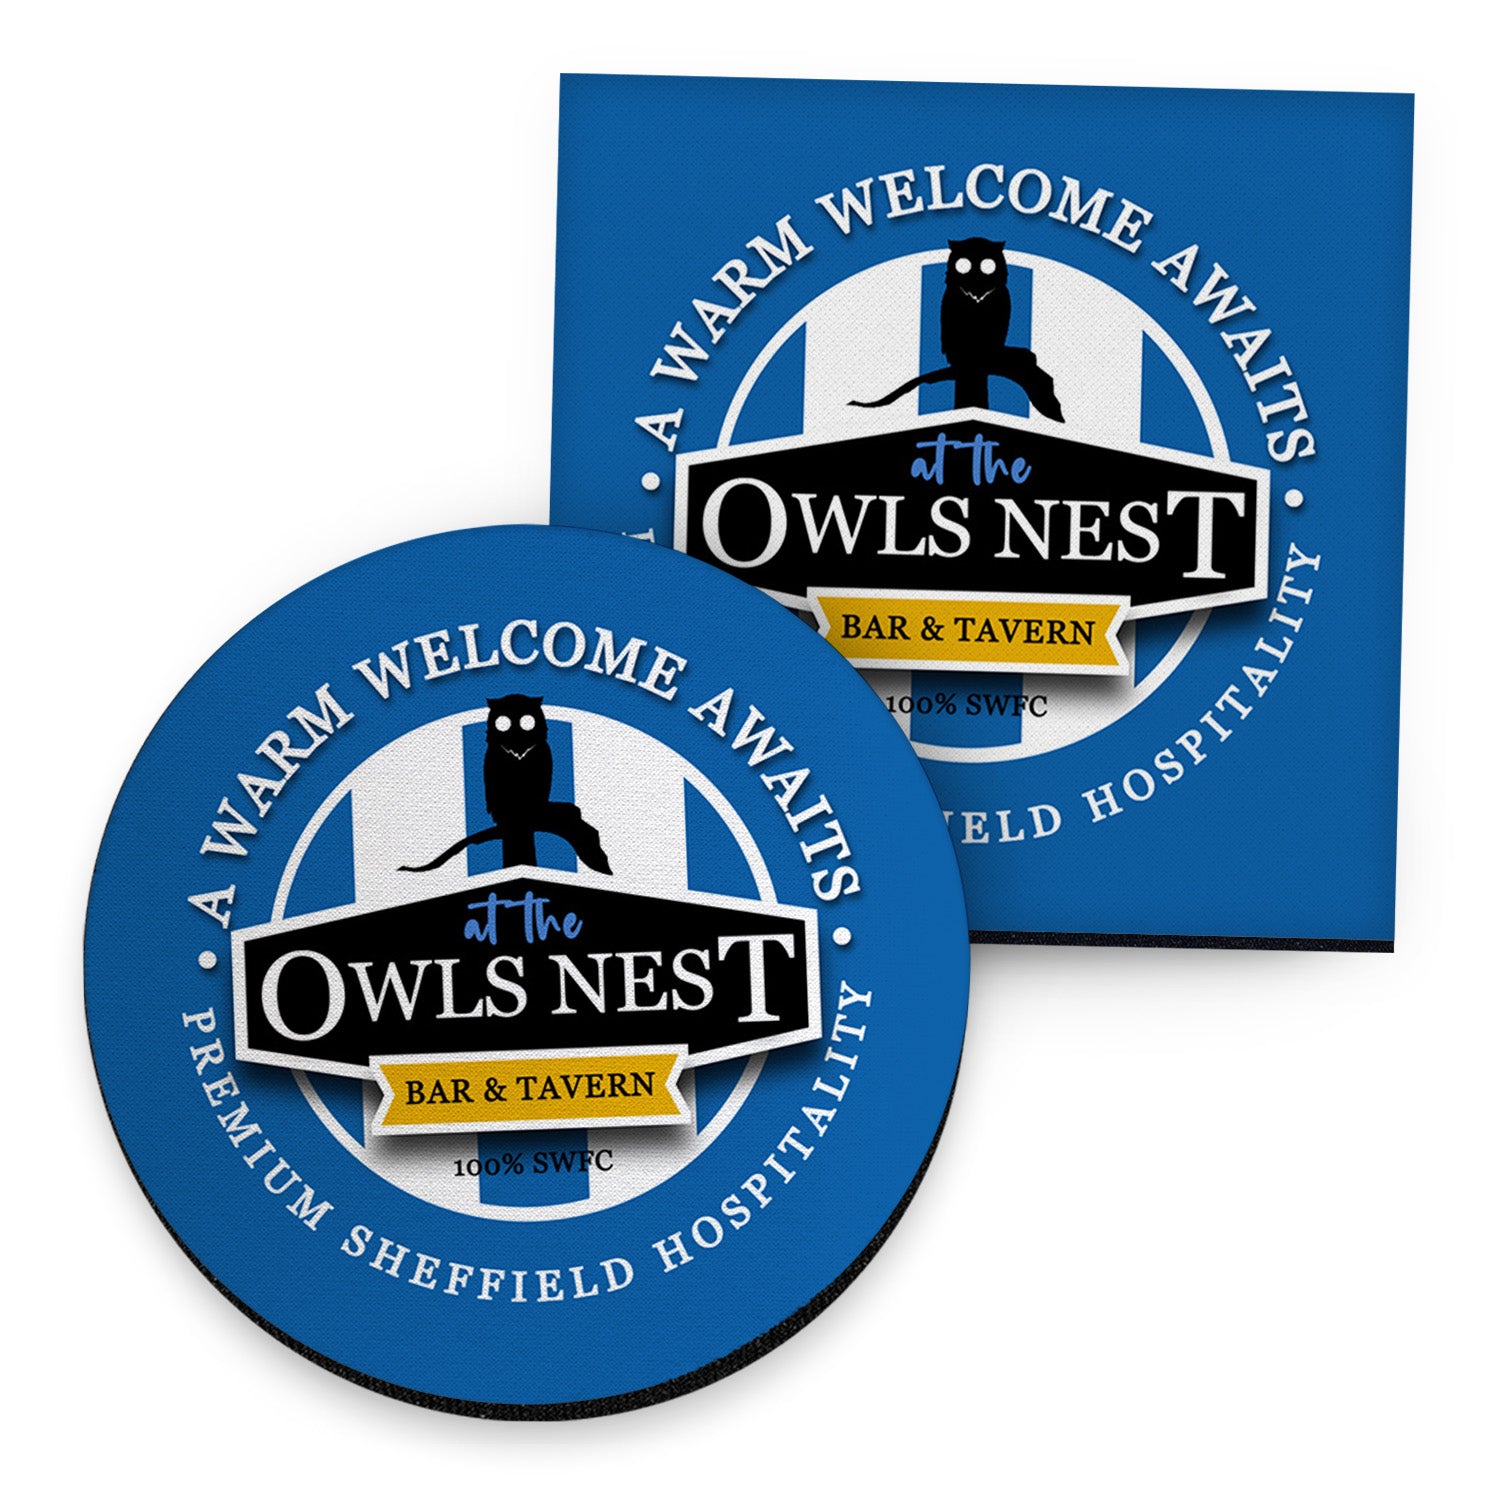 Wednesday Owls Nest - Football Coaster - Square Or Circle